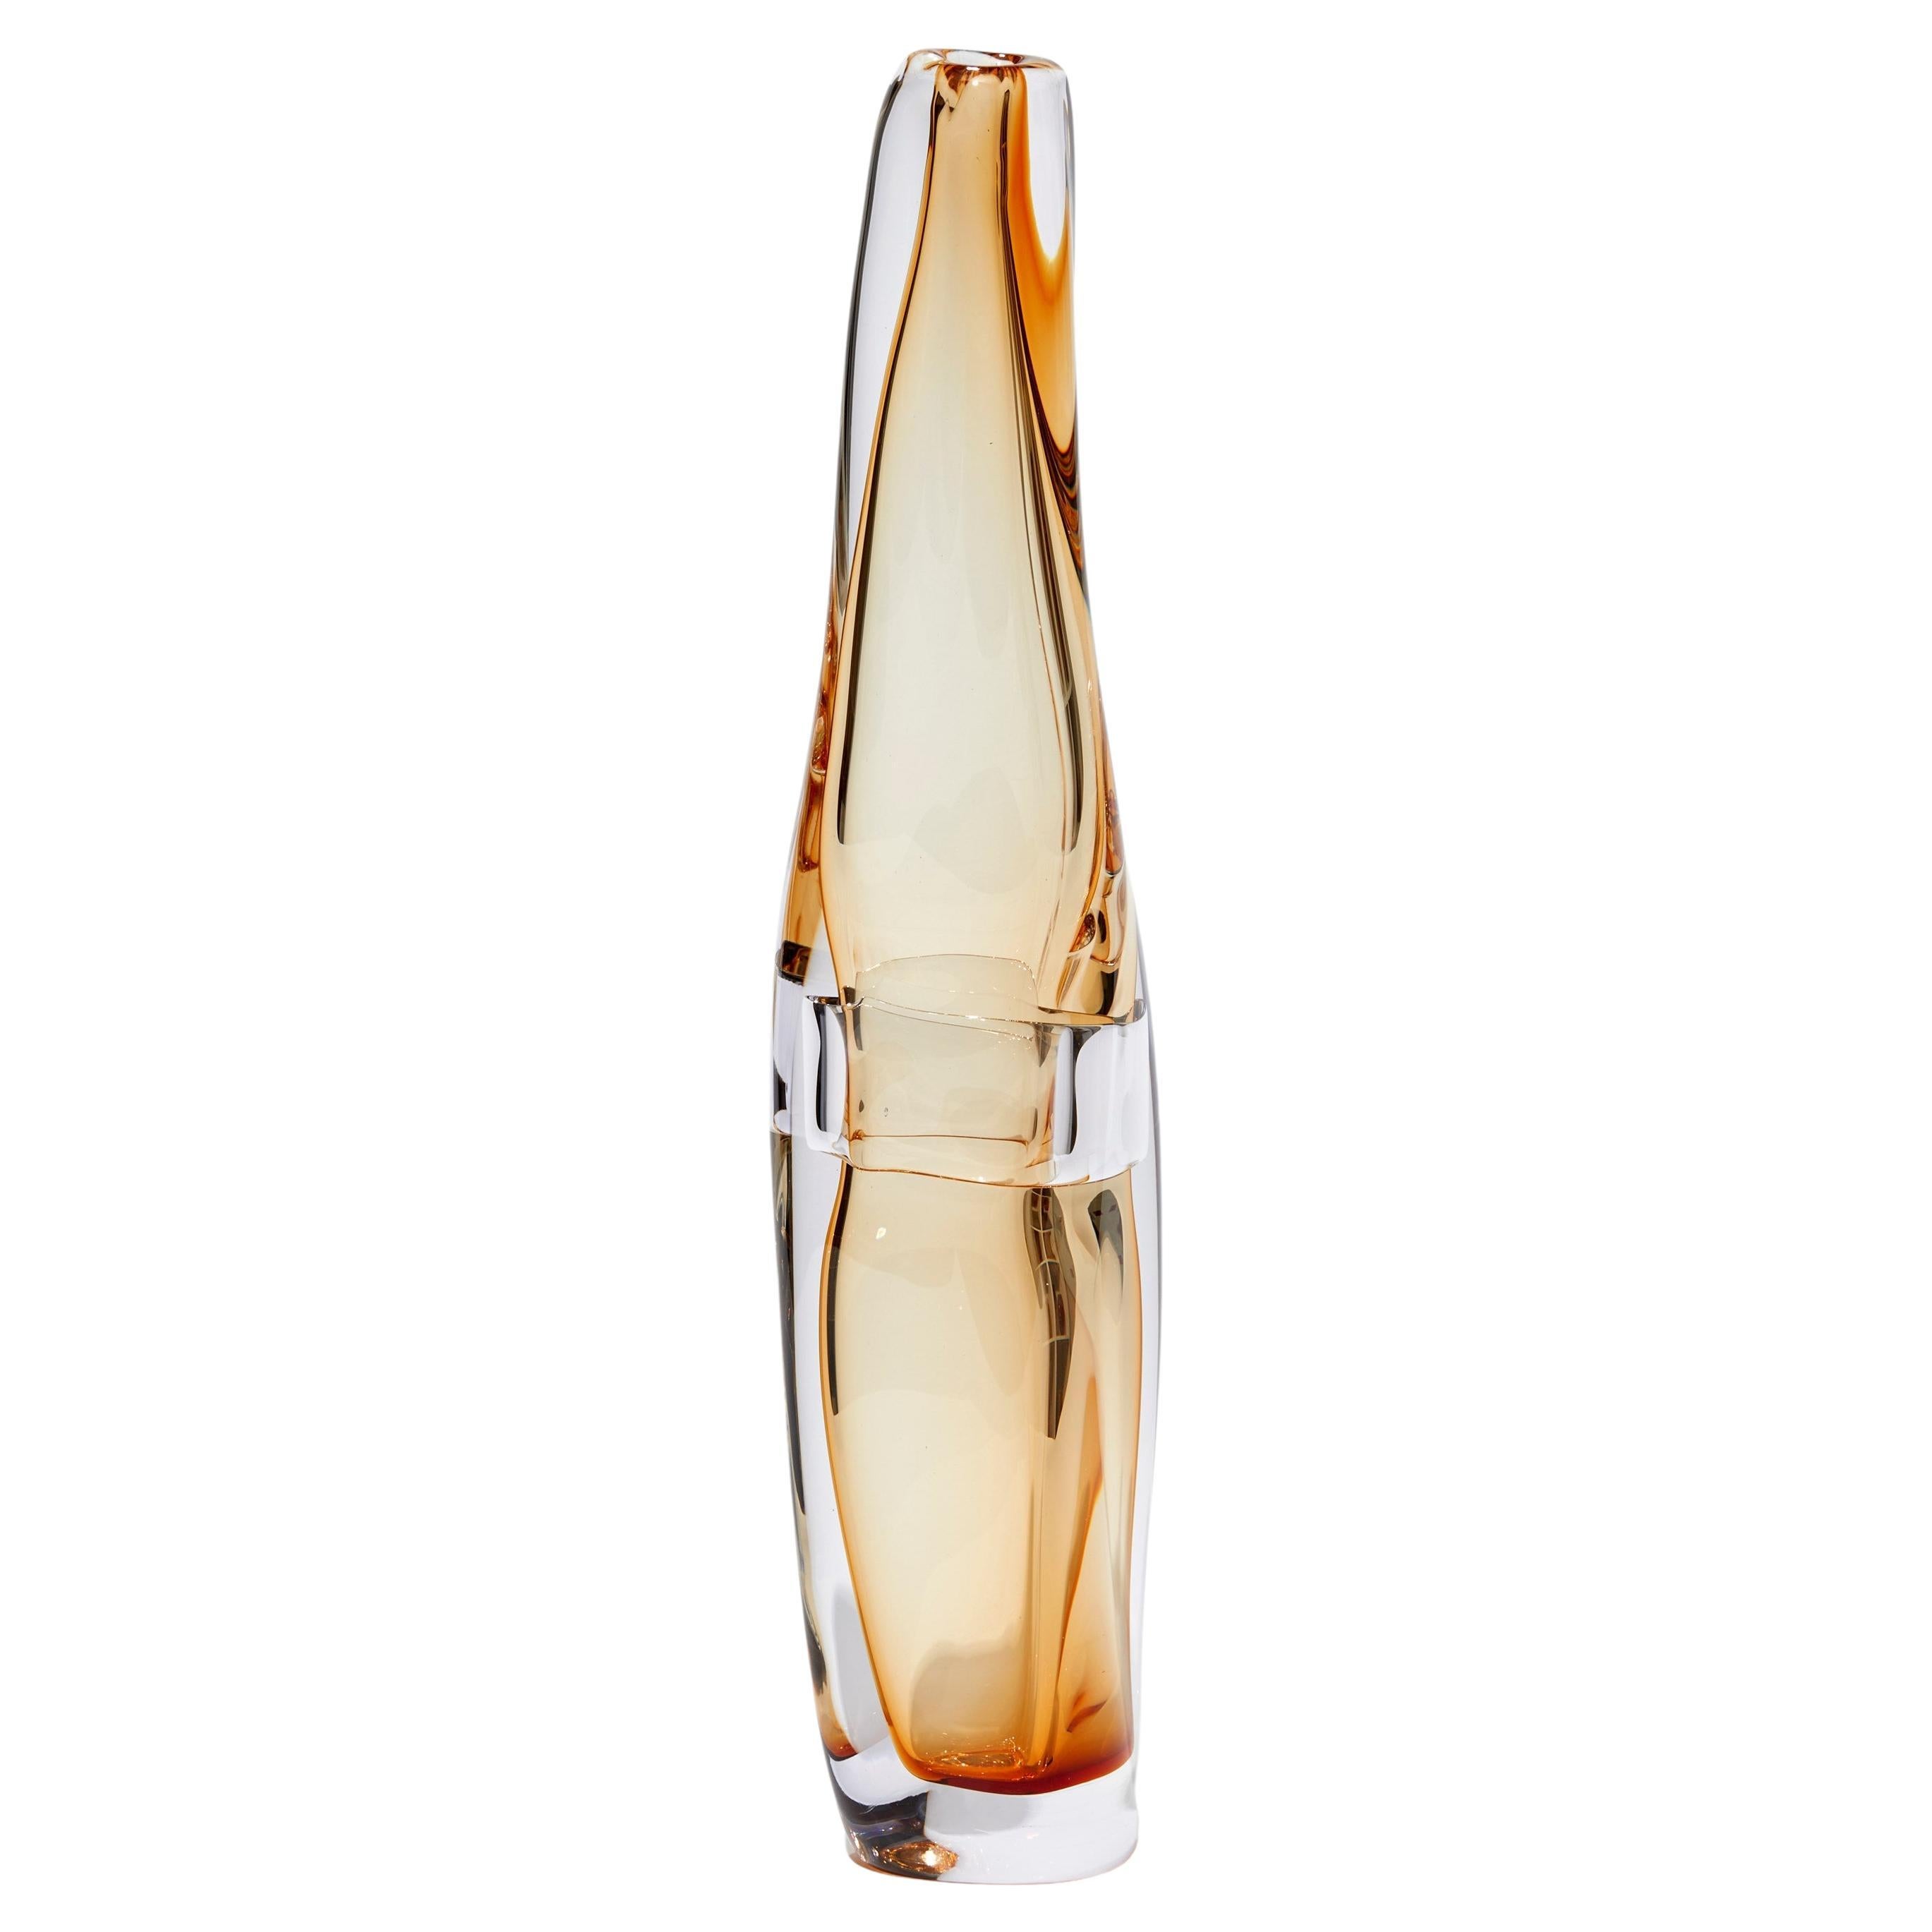  Sommarial in Whiskey, a soft amber fluid handmade glass vase by Vic Bamforth